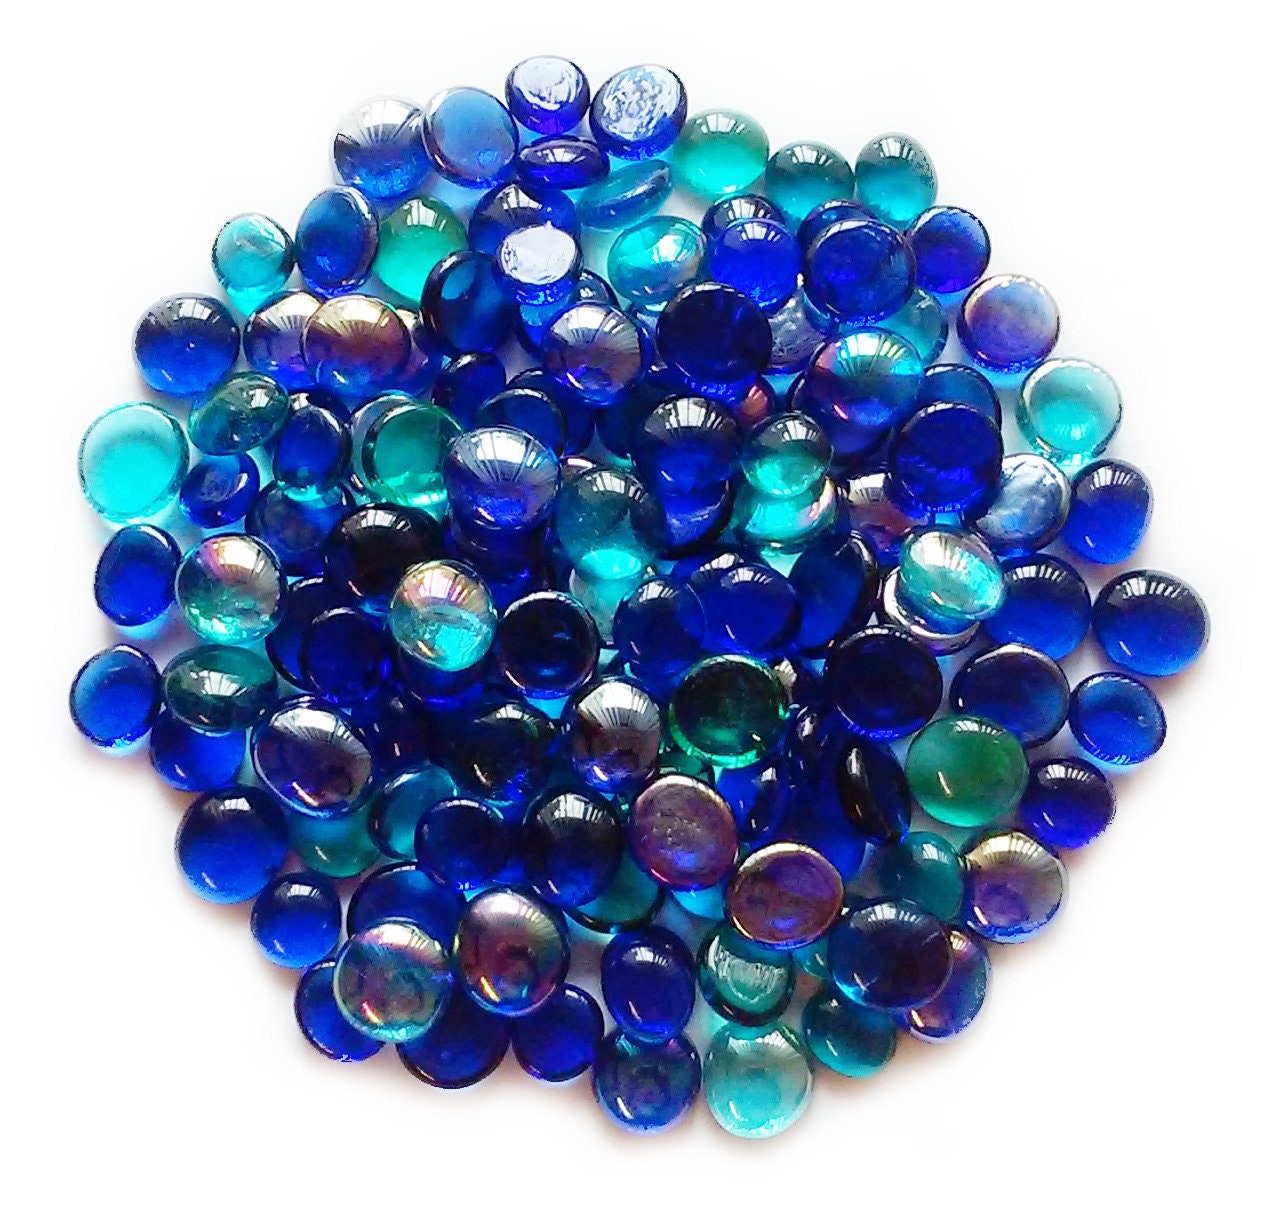 Creative Stuff Glass 100 Mixed Colors Glass Gems Stones, Mosaic Pebbles,  Centerpiece Flat Marbles, Vase Fillers, Cabochons 